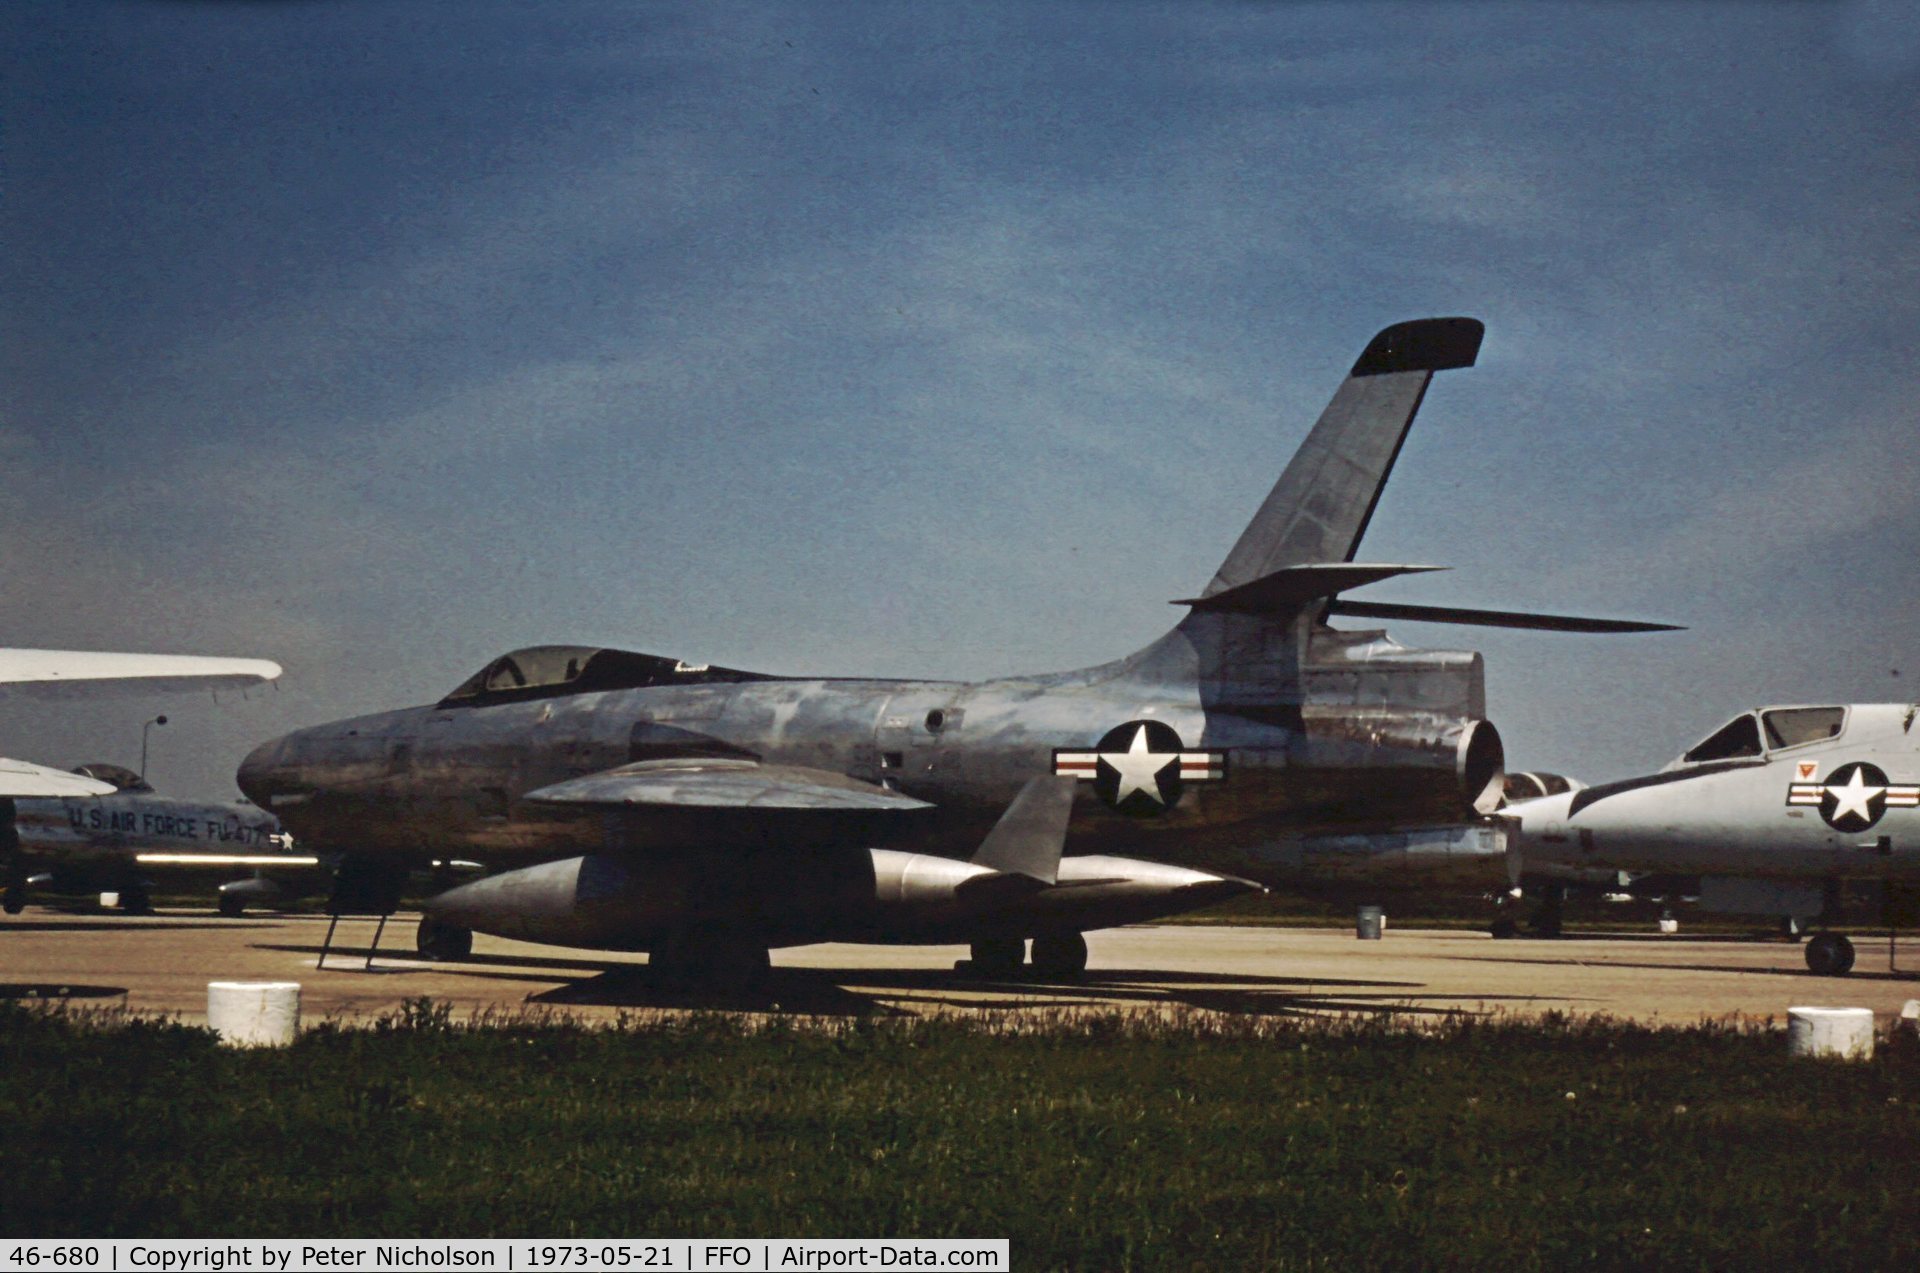 46-680, 1948 Republic XF-91 Thunderceptor C/N Not found 46-680, As displayed in the summer of 1973.